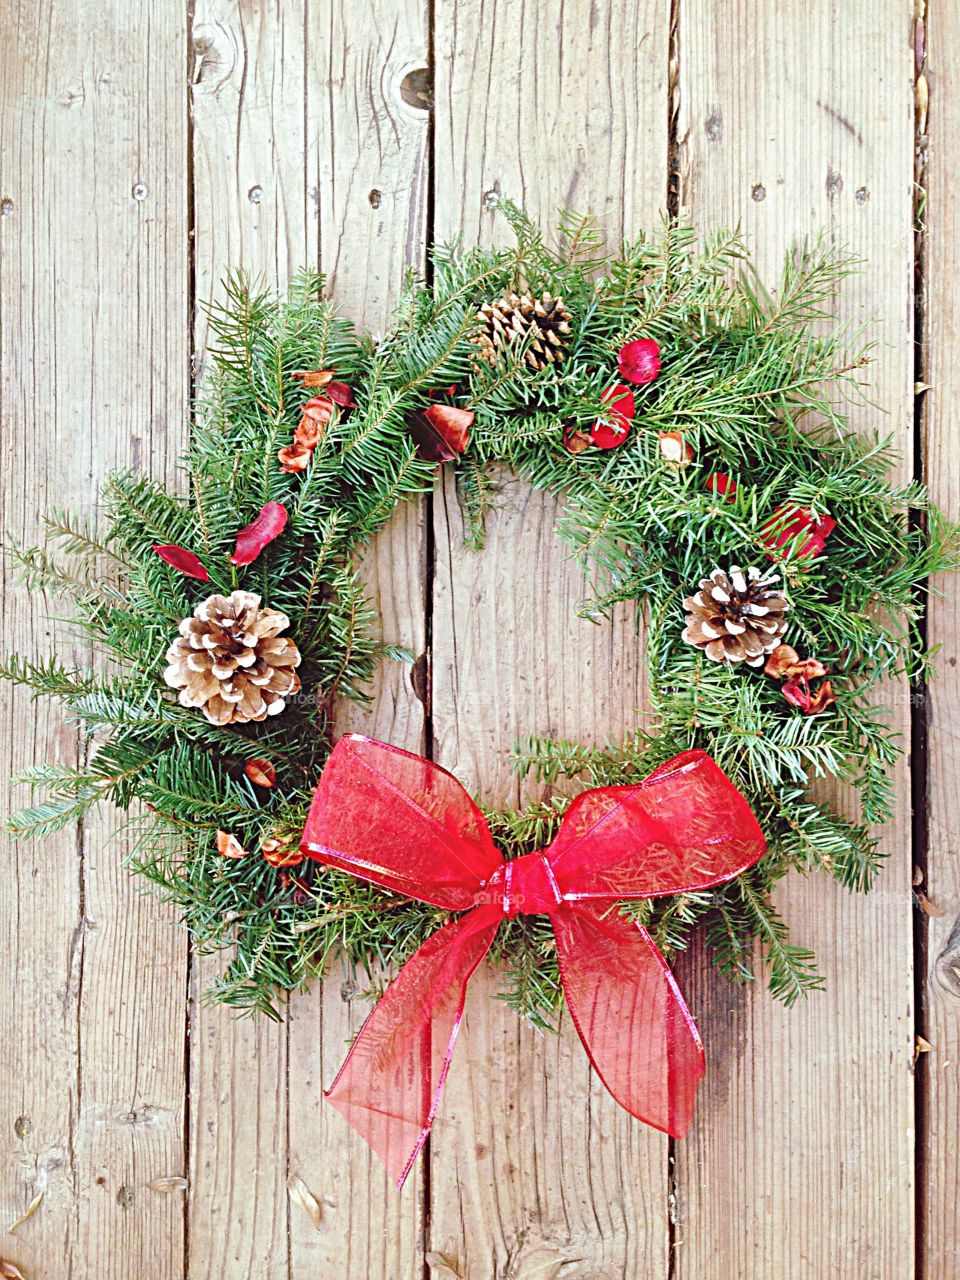 Homemade Christmas wreath with big red bow 